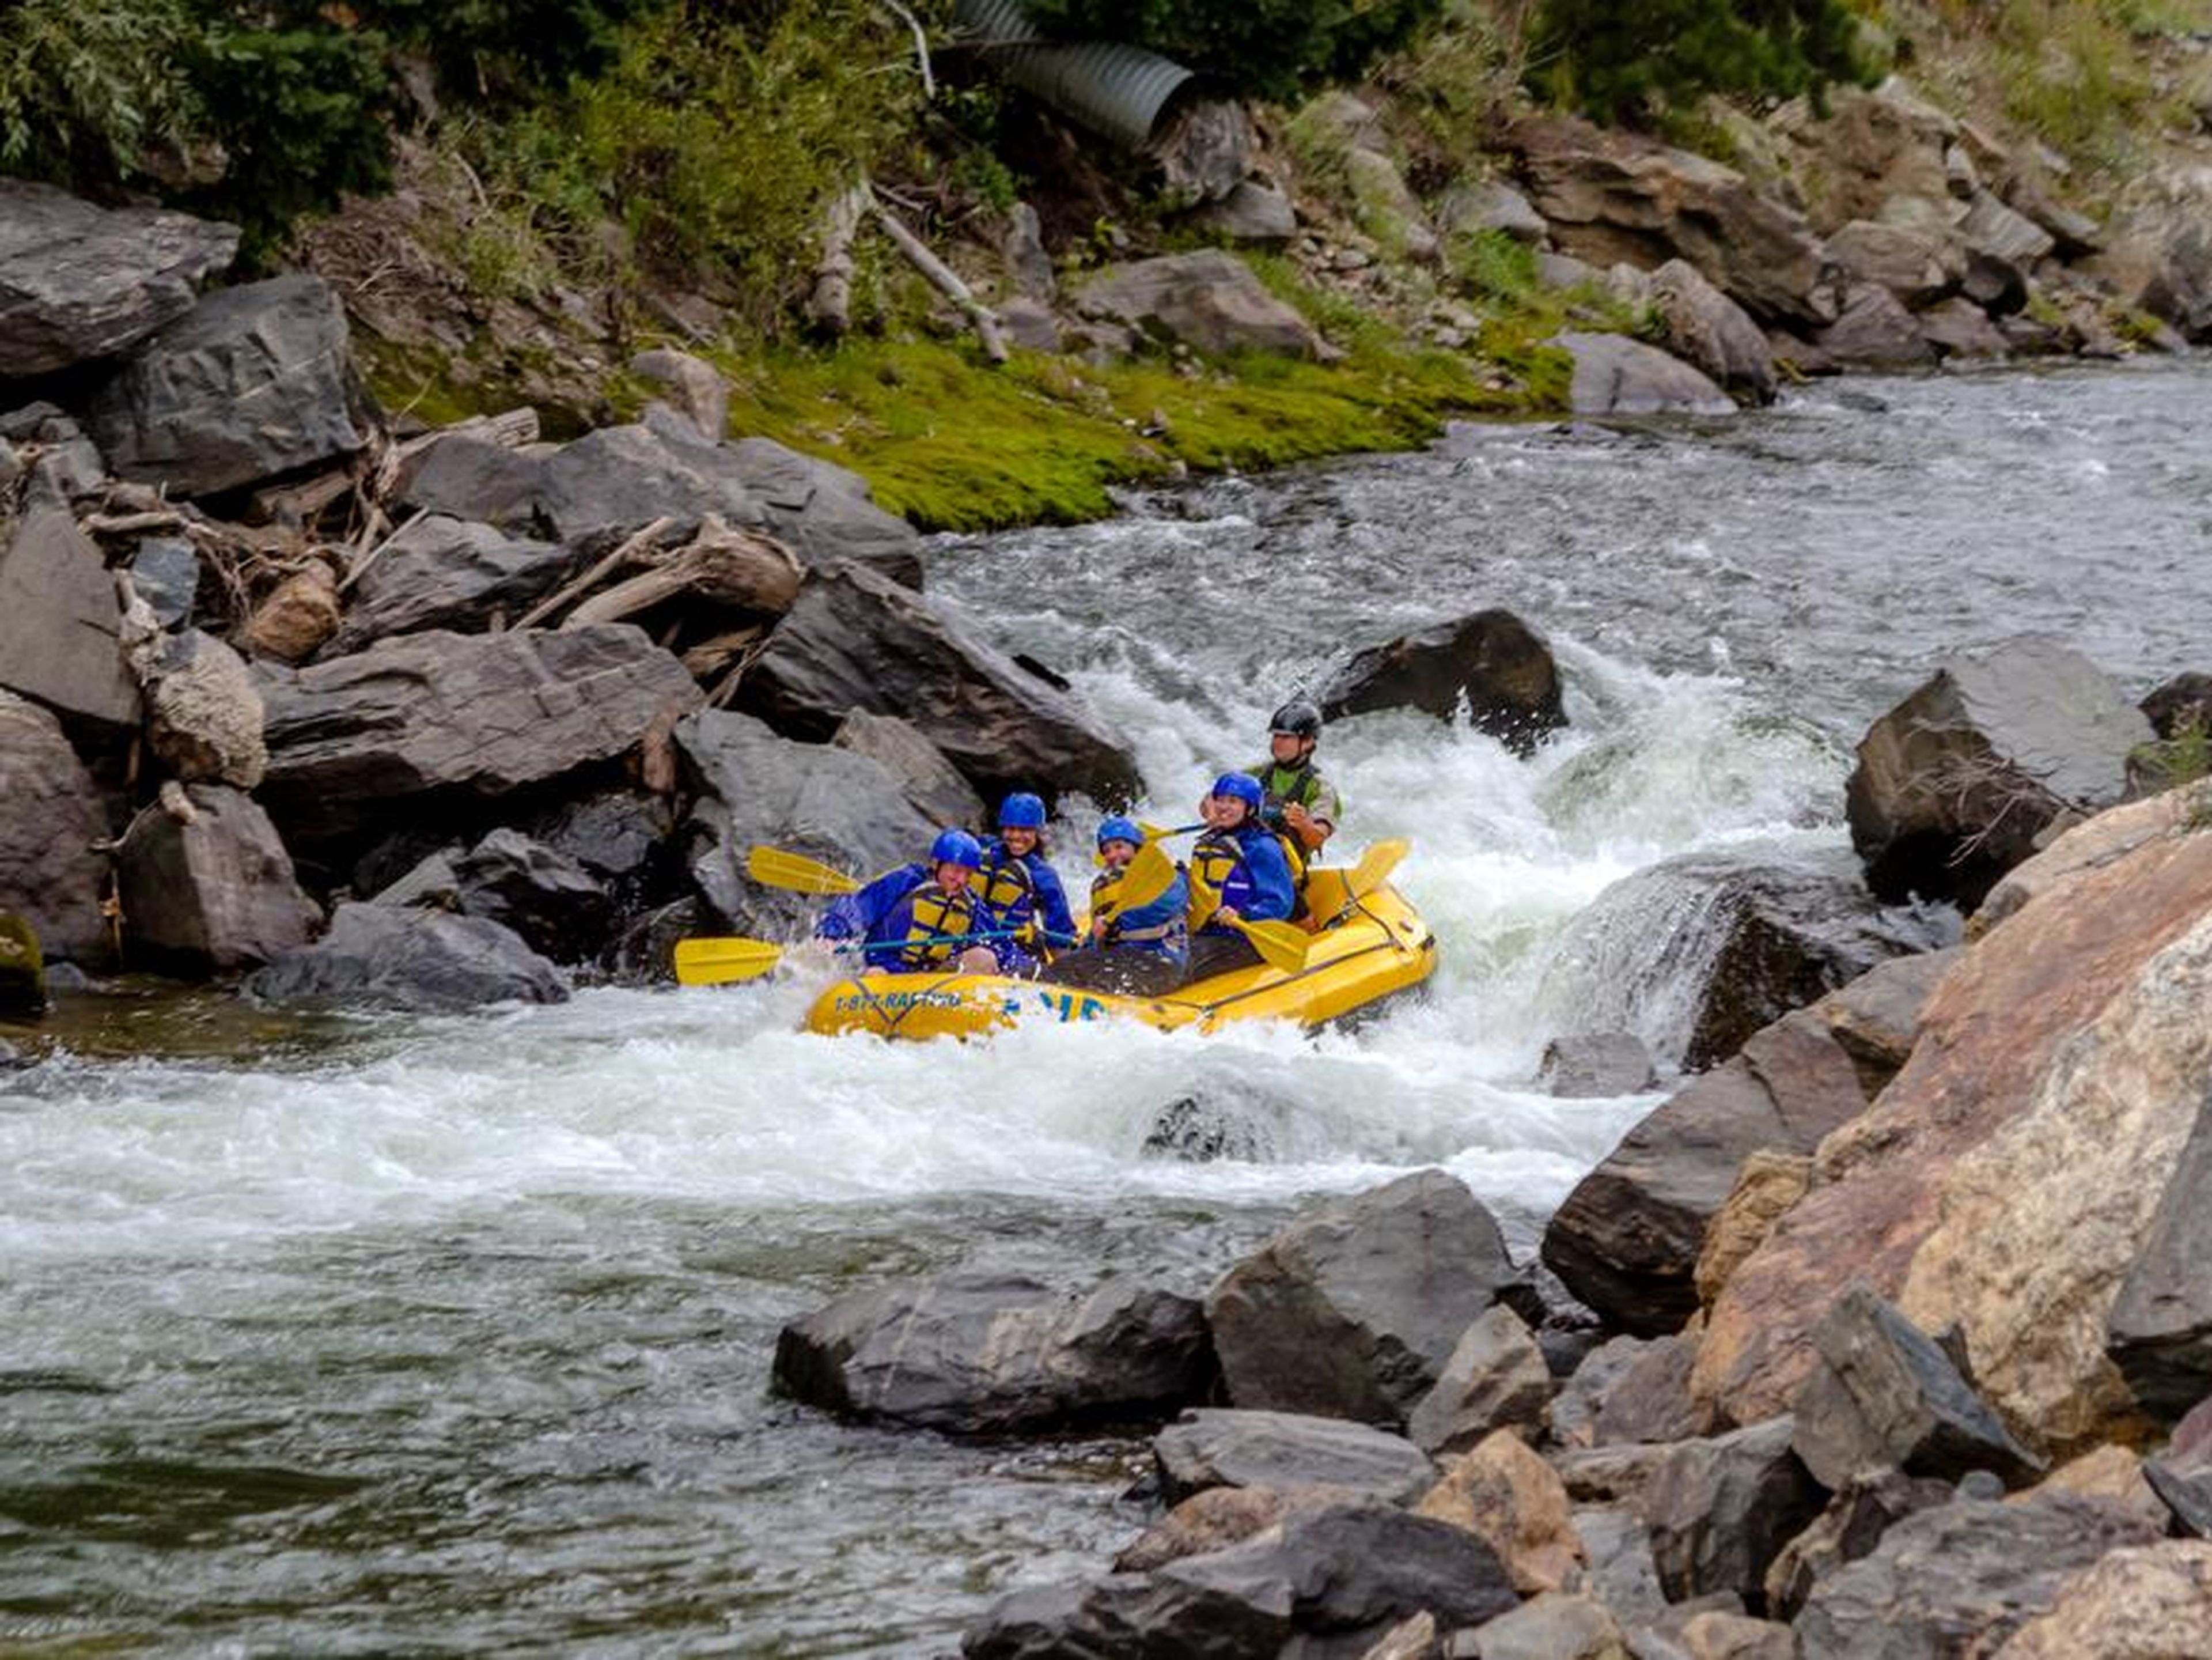 Whitewater rafting on the Colorado River.